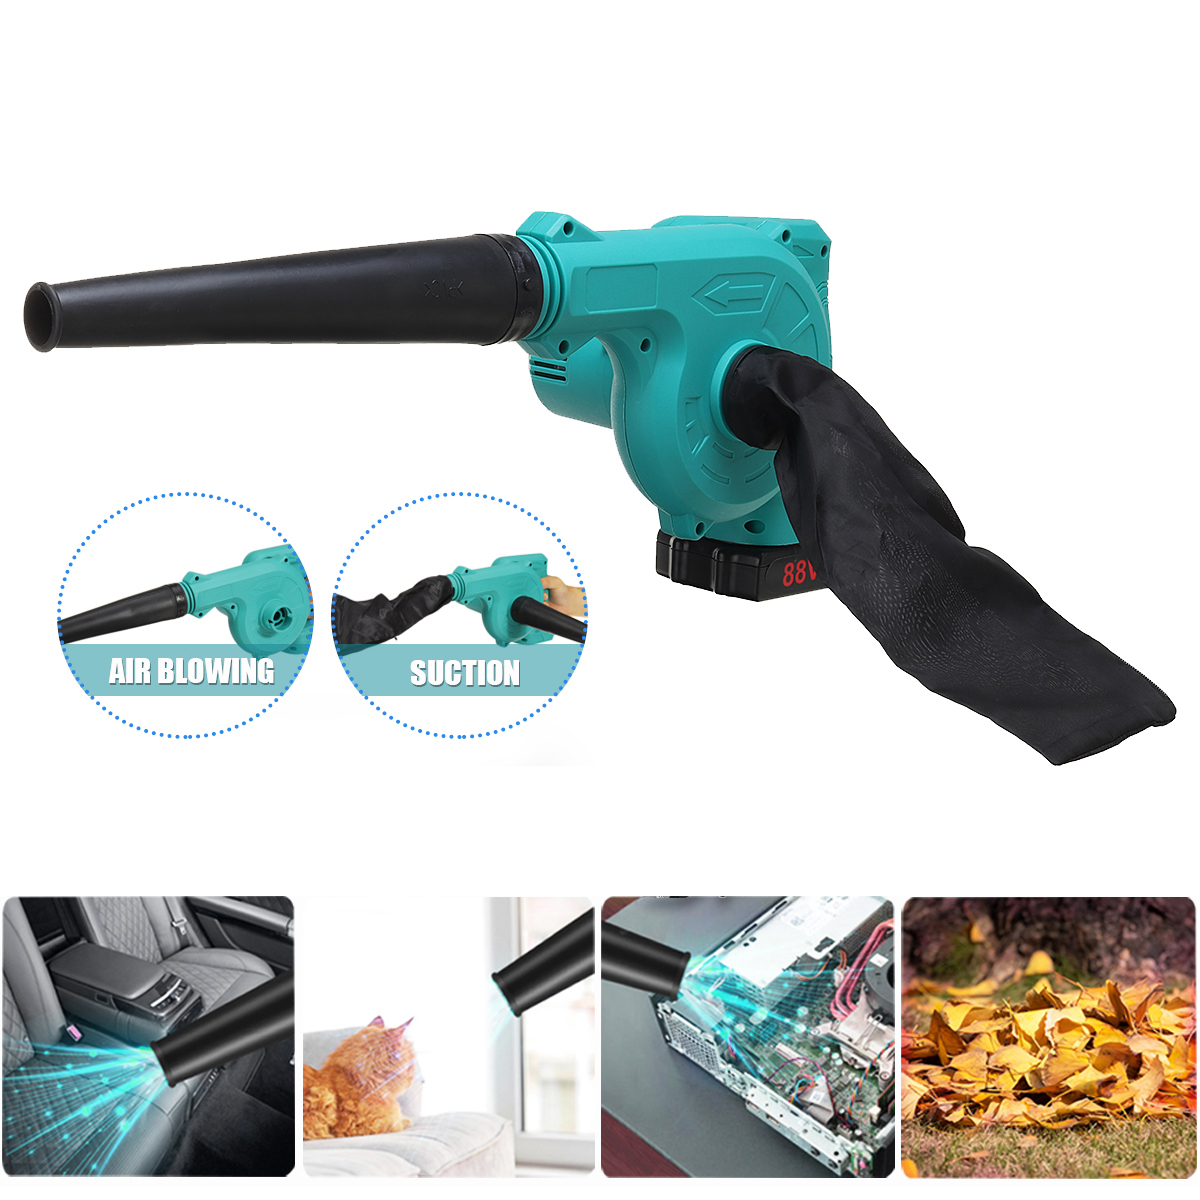 2in1-Cordless-Leaf-Blower-Garden-Electric-Air-Snow-Blower-Portable-Dust-Cleaner-Lightweight-1869991-2